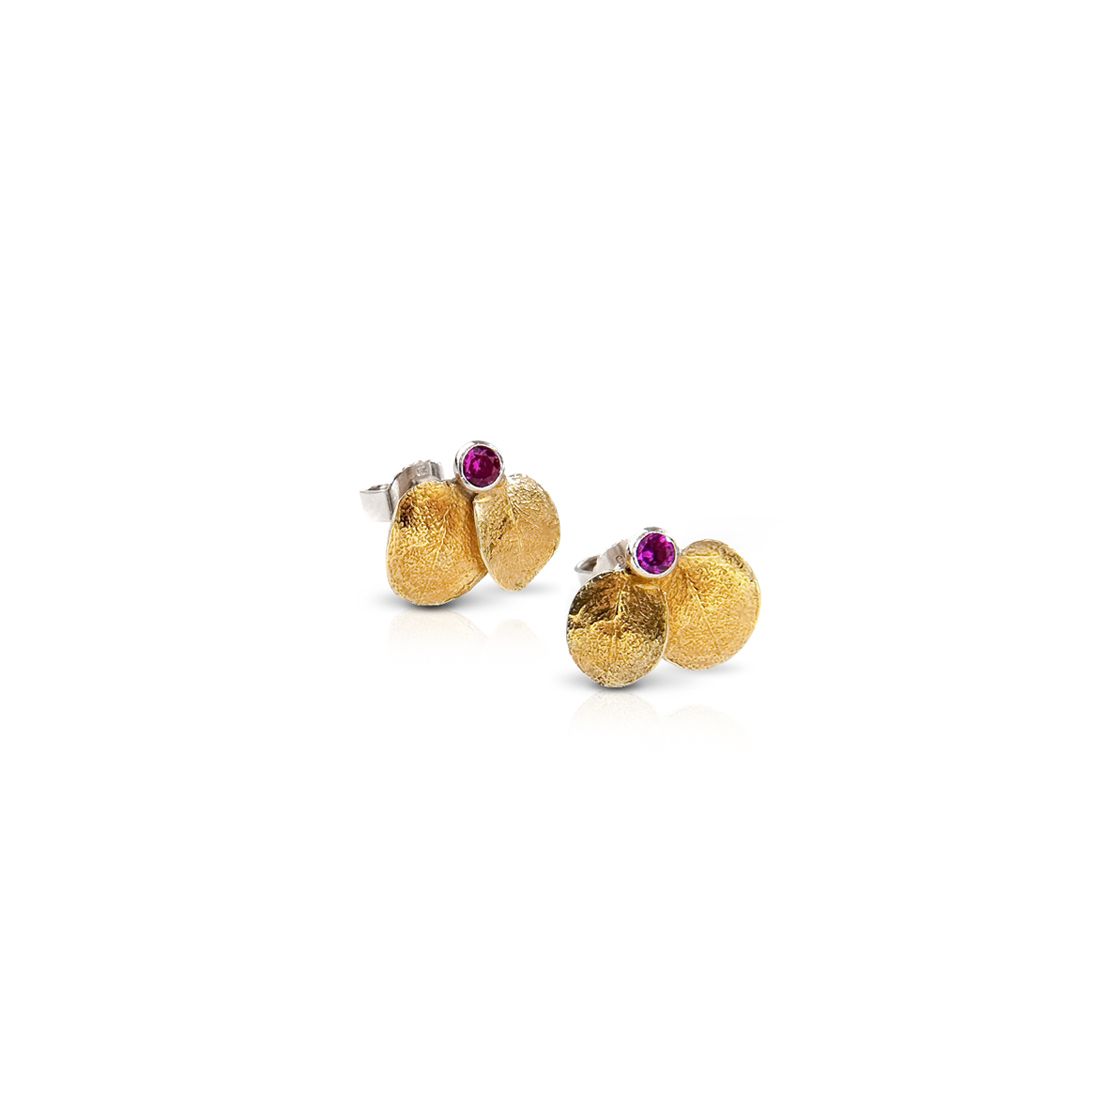 Two exquisite gold leaves touched by a colorful dewdrop zircon stone.